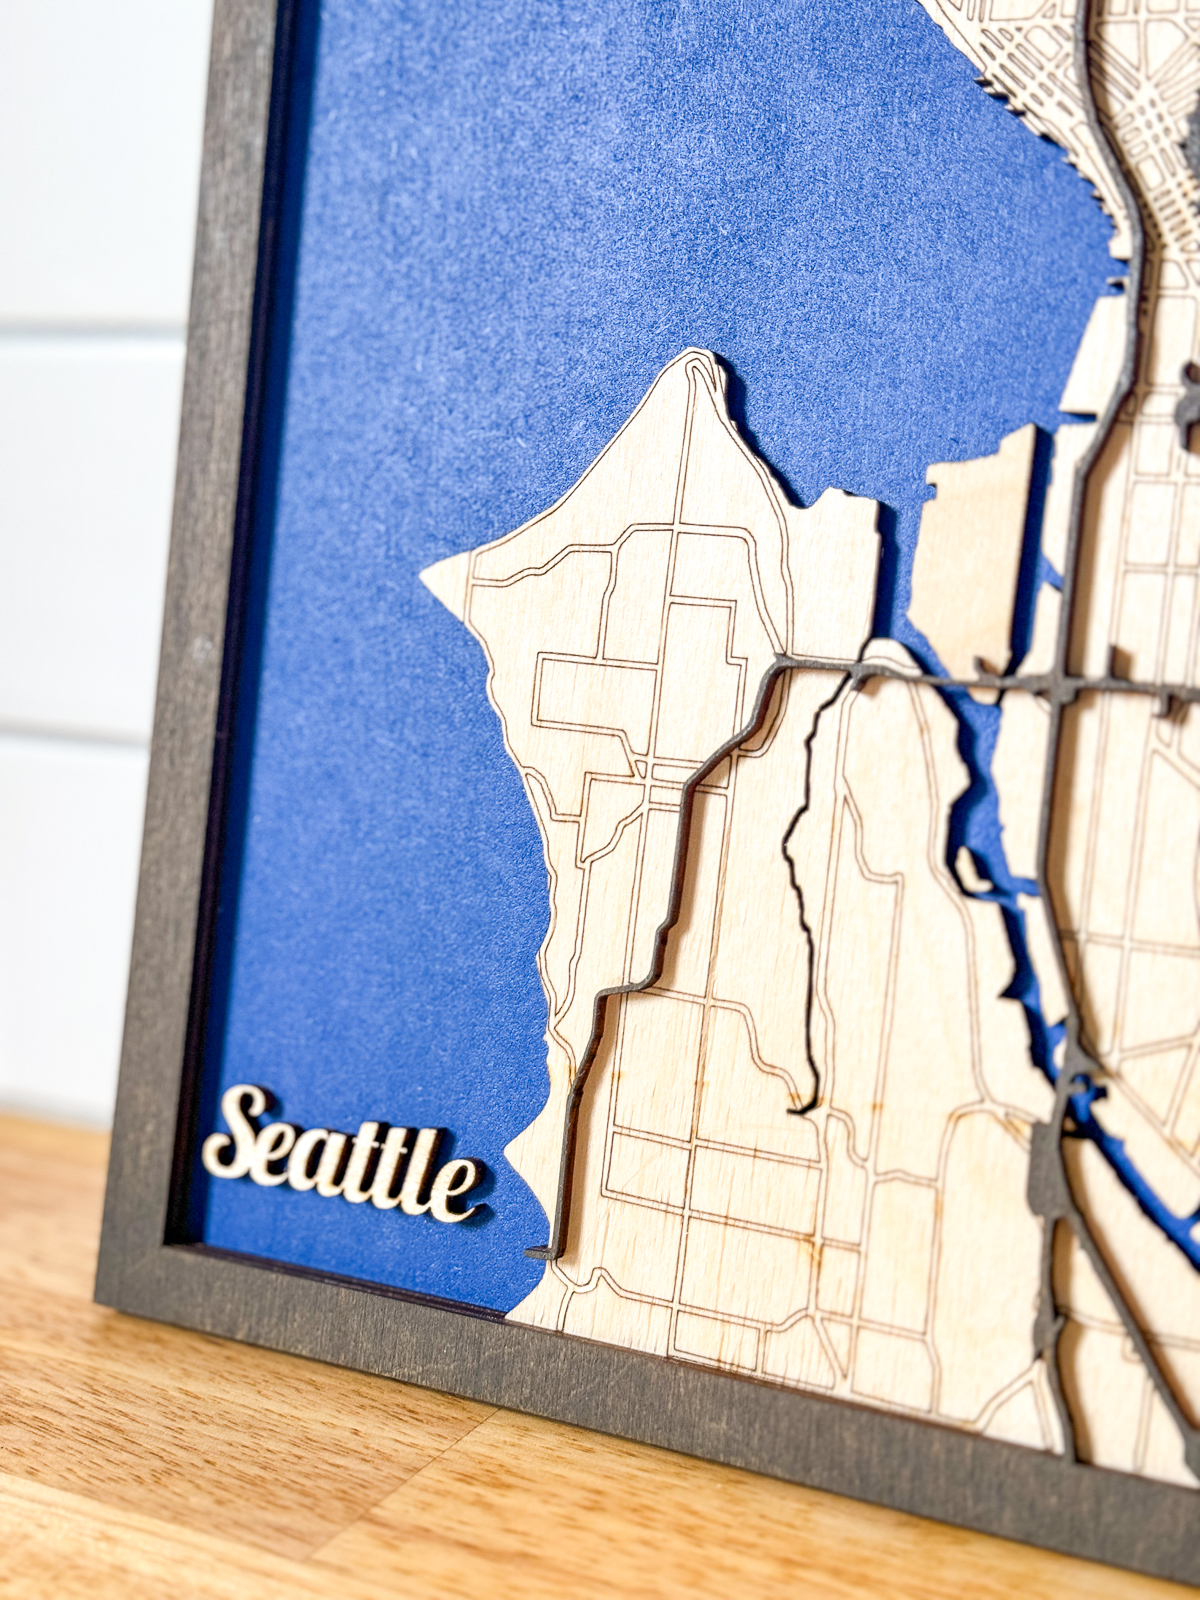 close up view of laser cut map of Seattle